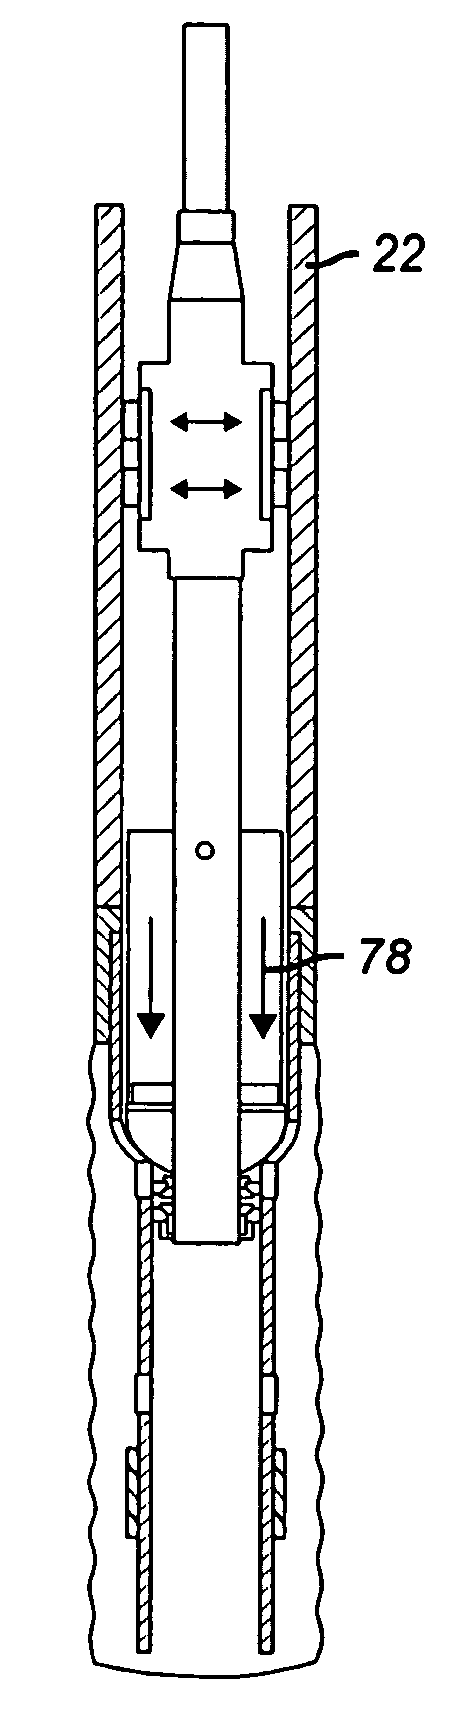 One trip cemented expandable monobore liner system and method